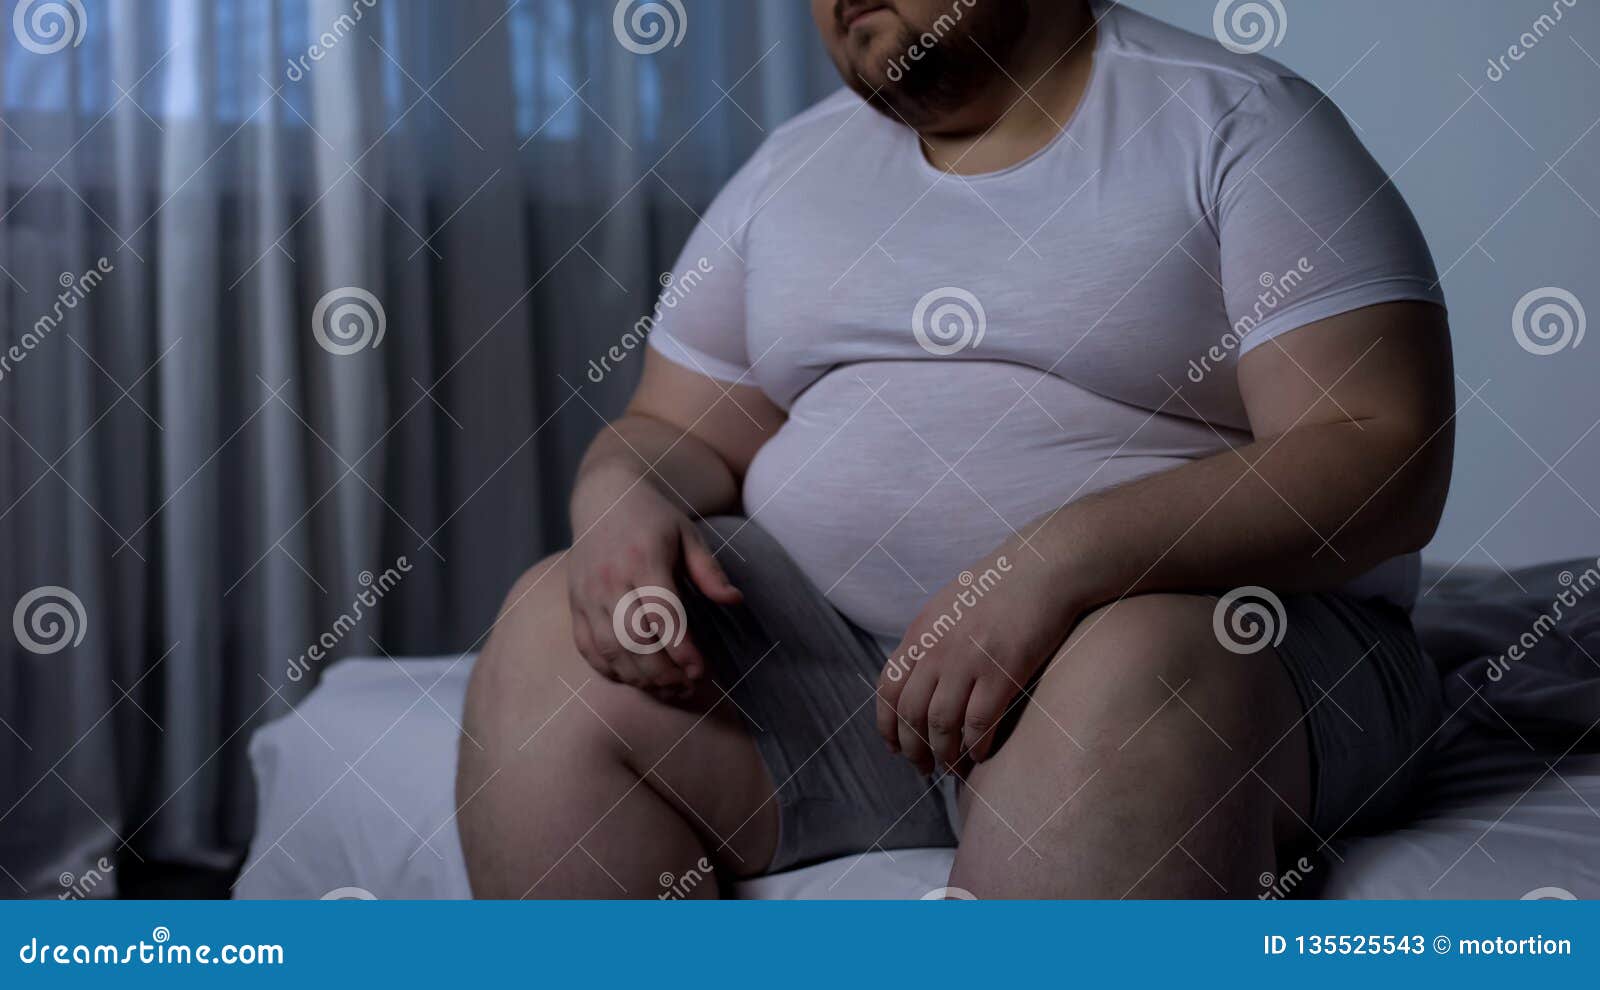 obese man feels heaviness and pain in stomach, abdominal bloating, indigestion